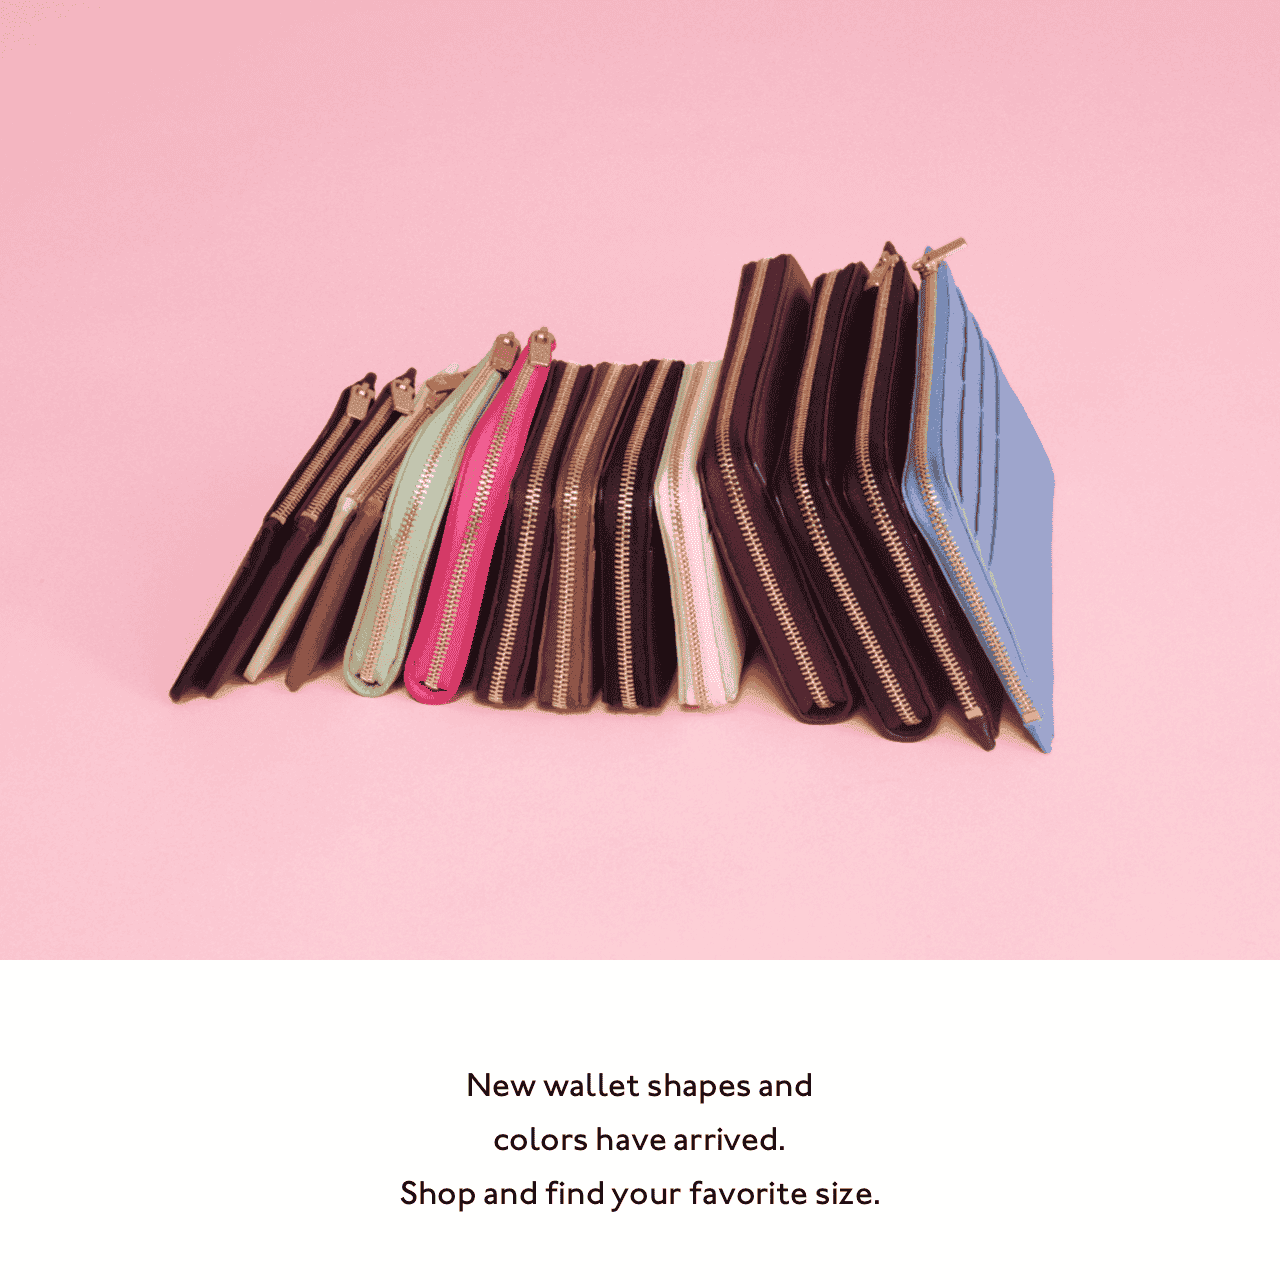 New wallet shapes and colors have arrived. Shop and find your favorite size.